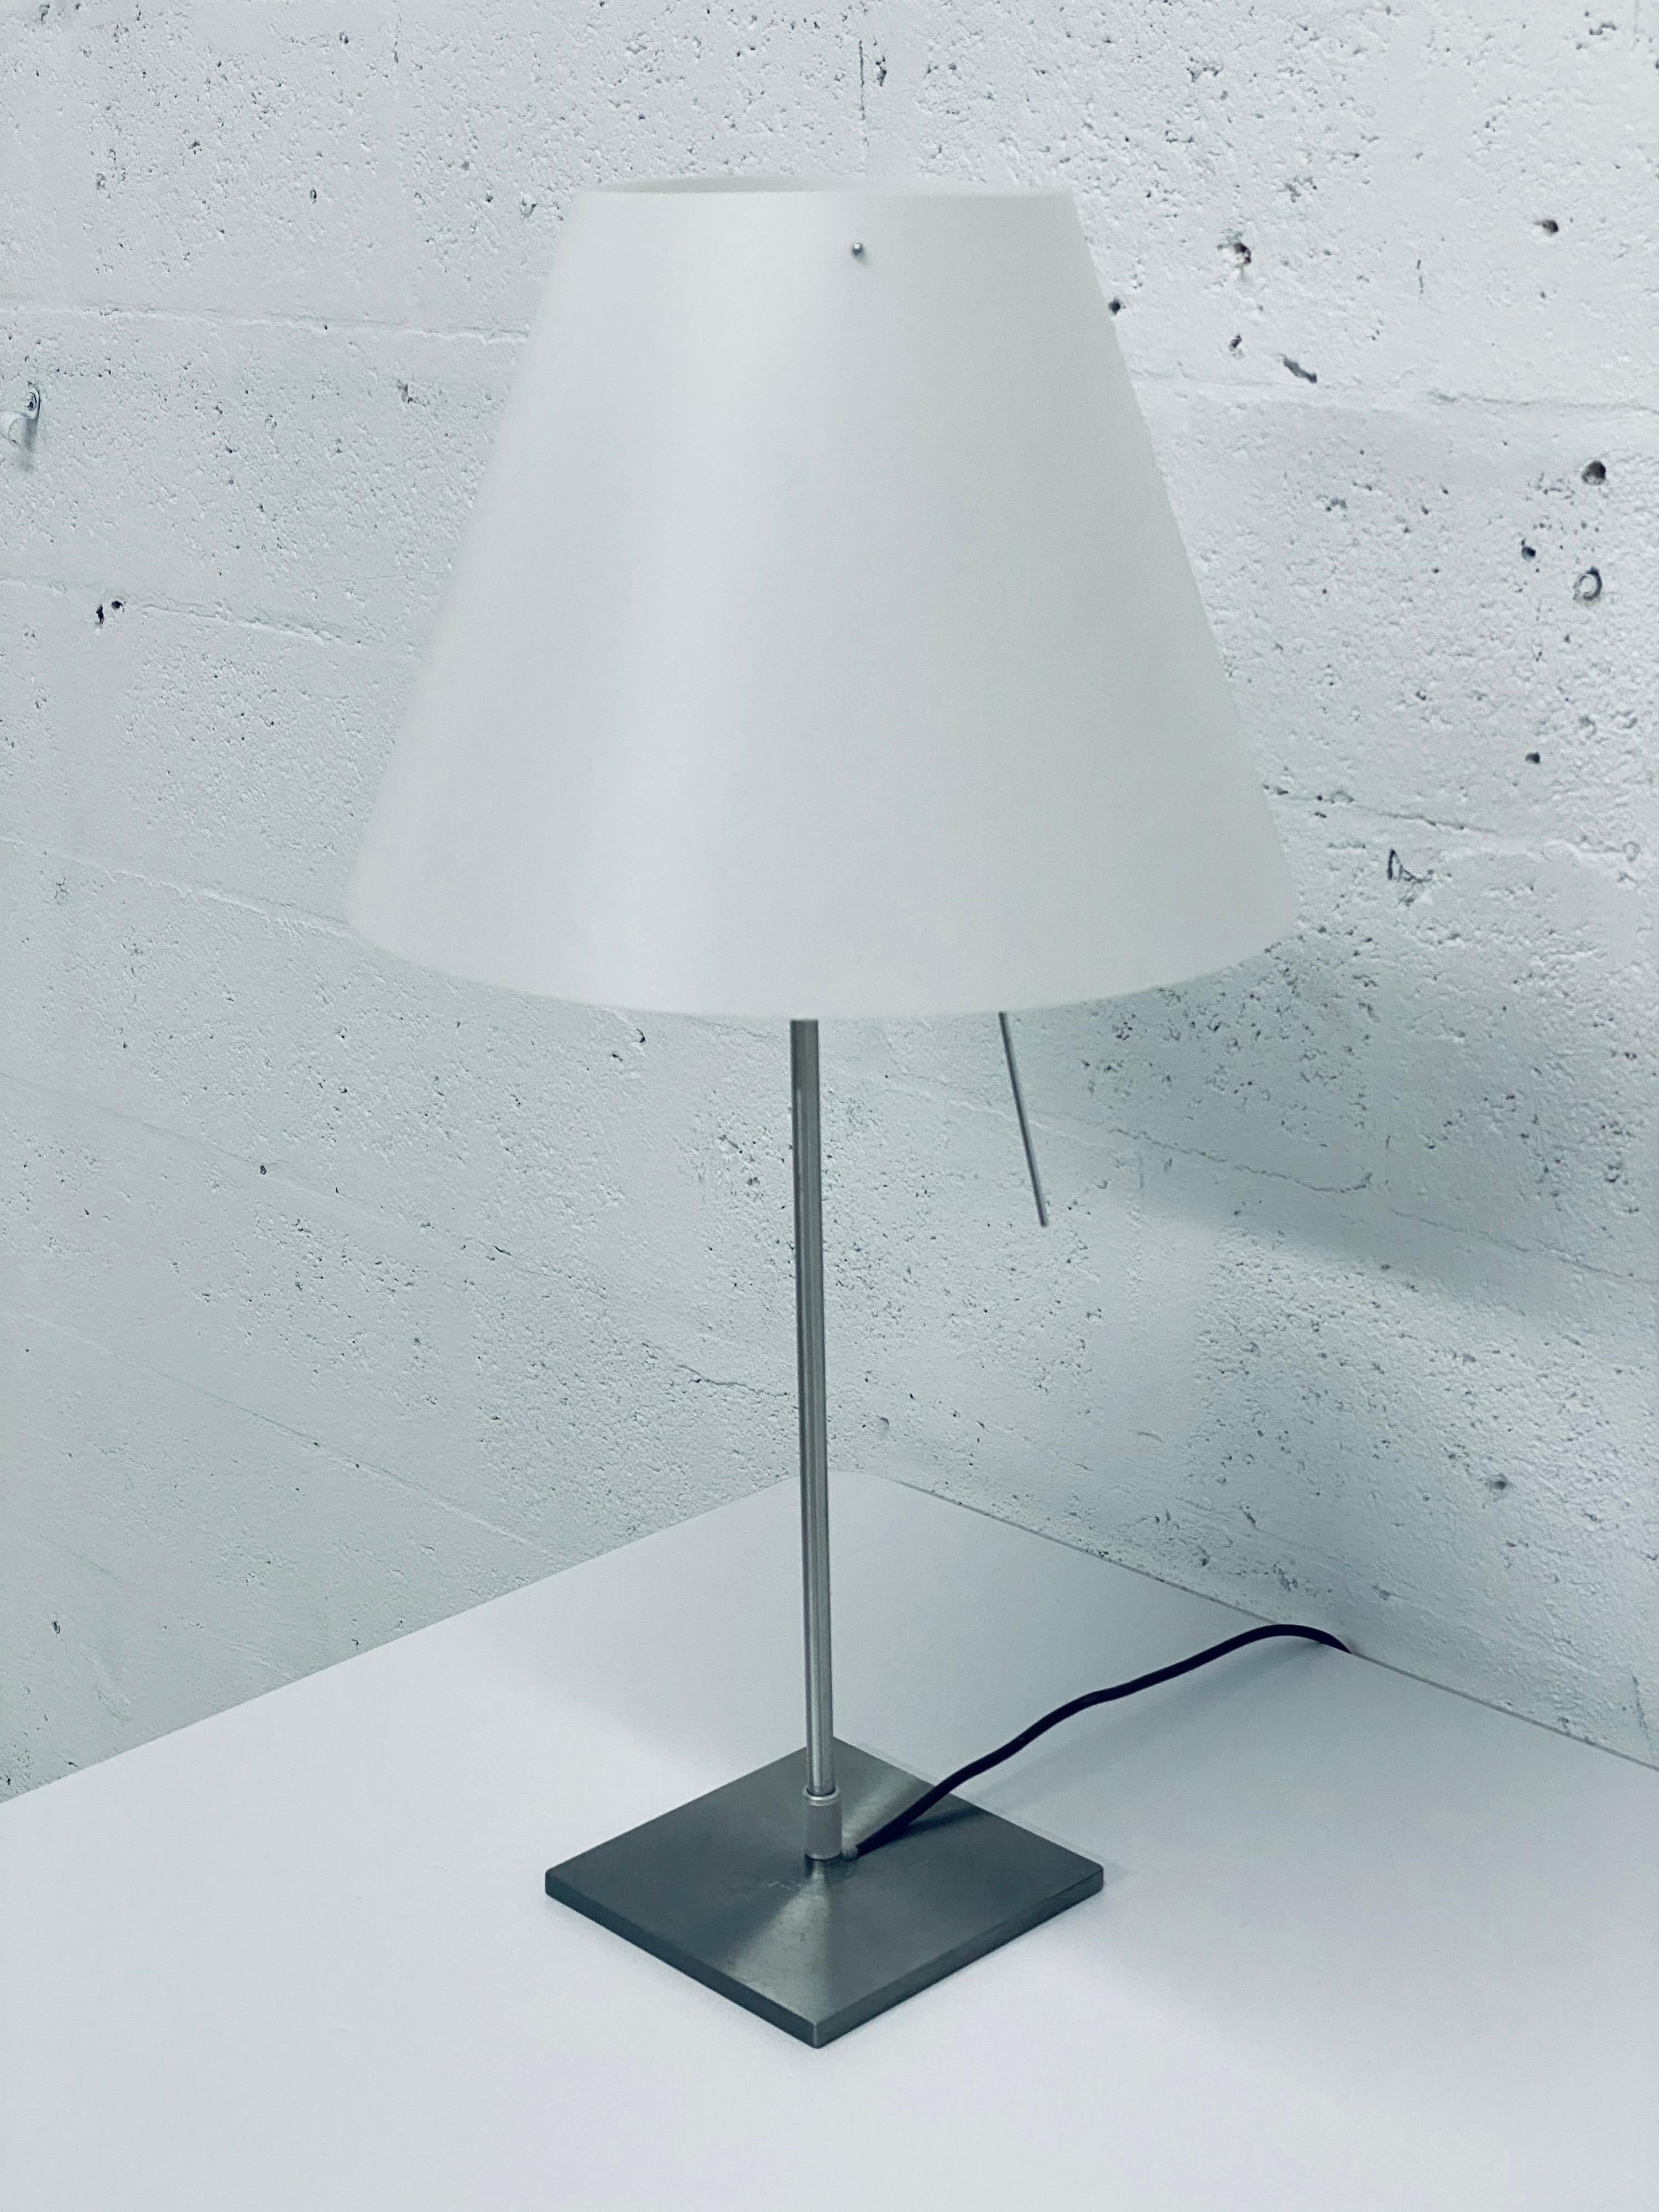 Designed by Paolo Rizzatto, the D13 Costanza lamp eliminates a warm pleasant light through the matte white plastic shade. The lamp is dimmable by touching the dimmer rod and has four levels of light intensity and the rod also turns the lamp on and